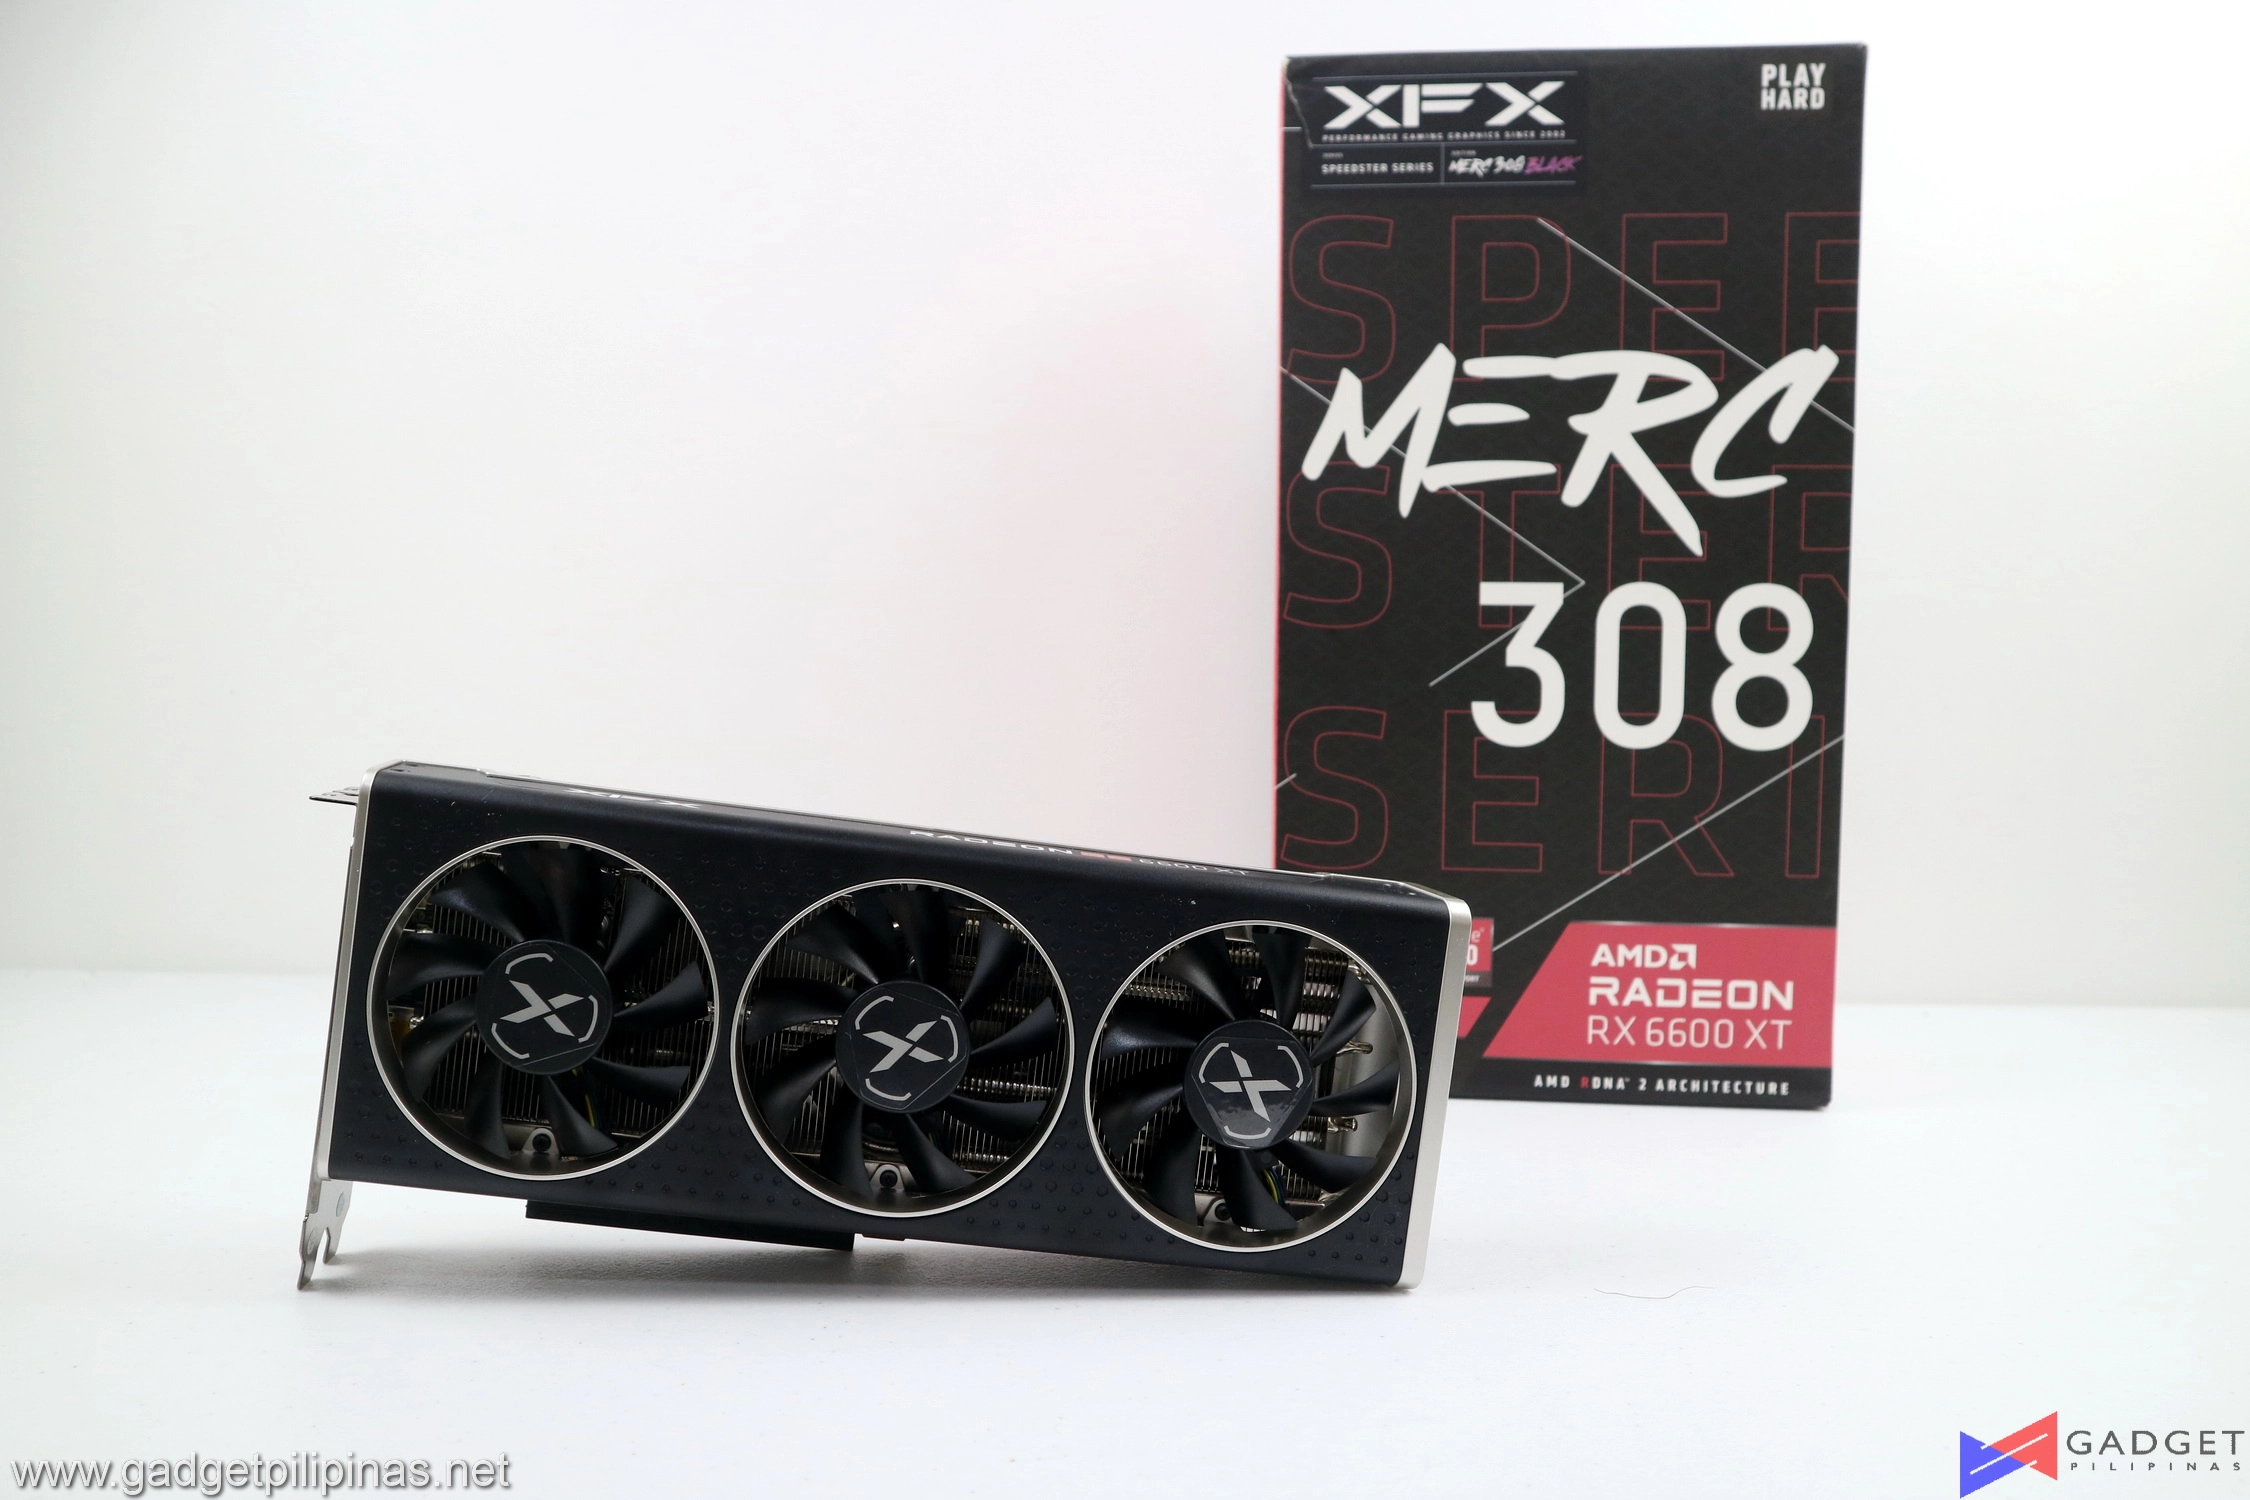 XFX Radeon RX 6600 XT MERC 308 Graphics Card Review – Only For 1080p